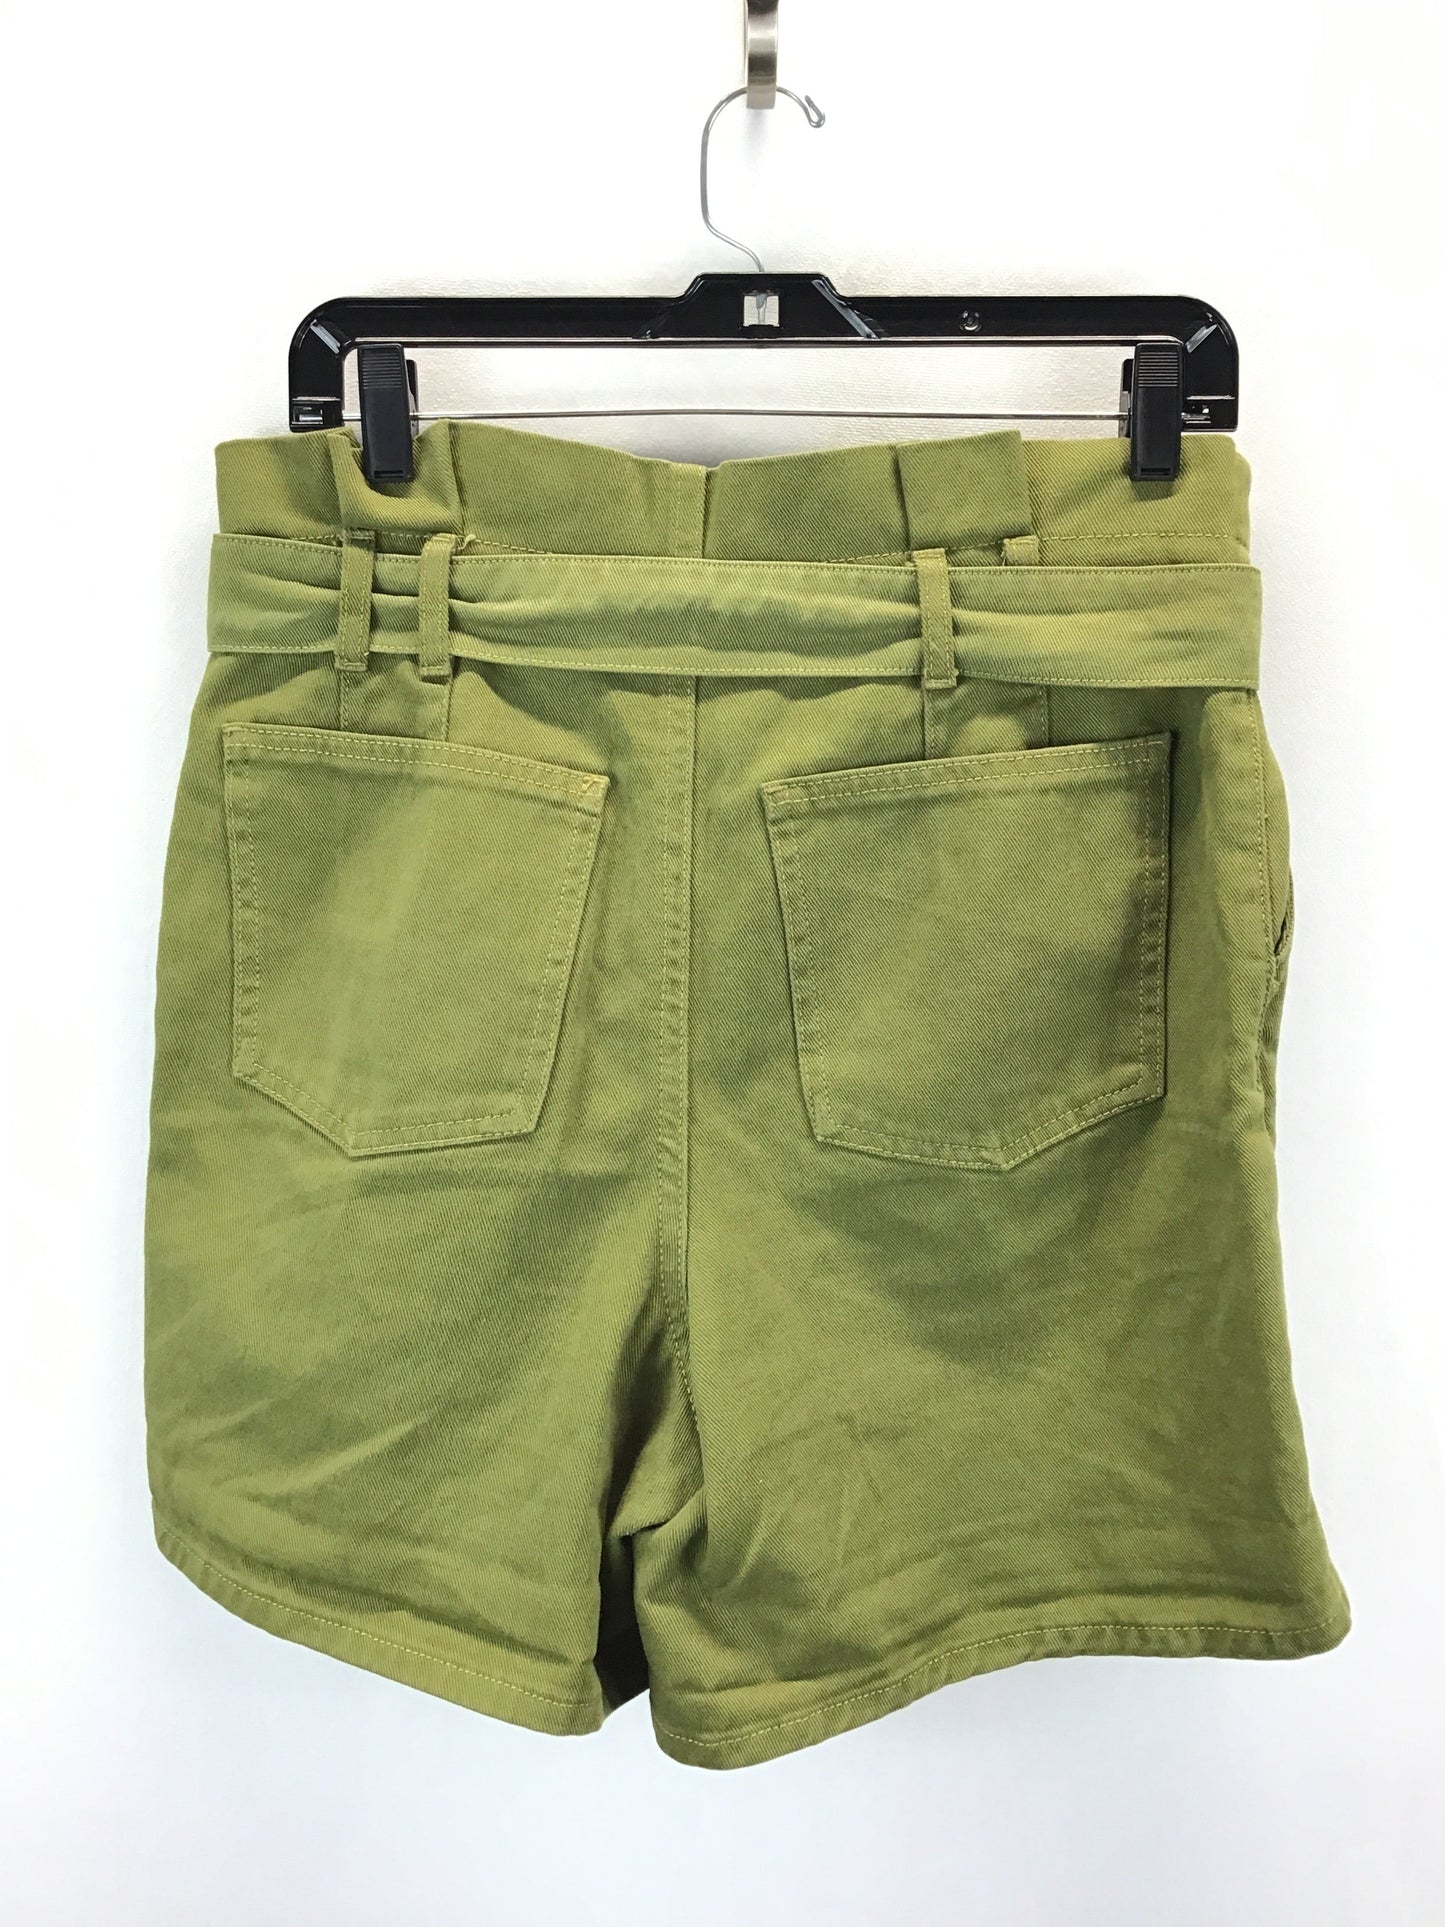 Green Shorts Free People, Size 6